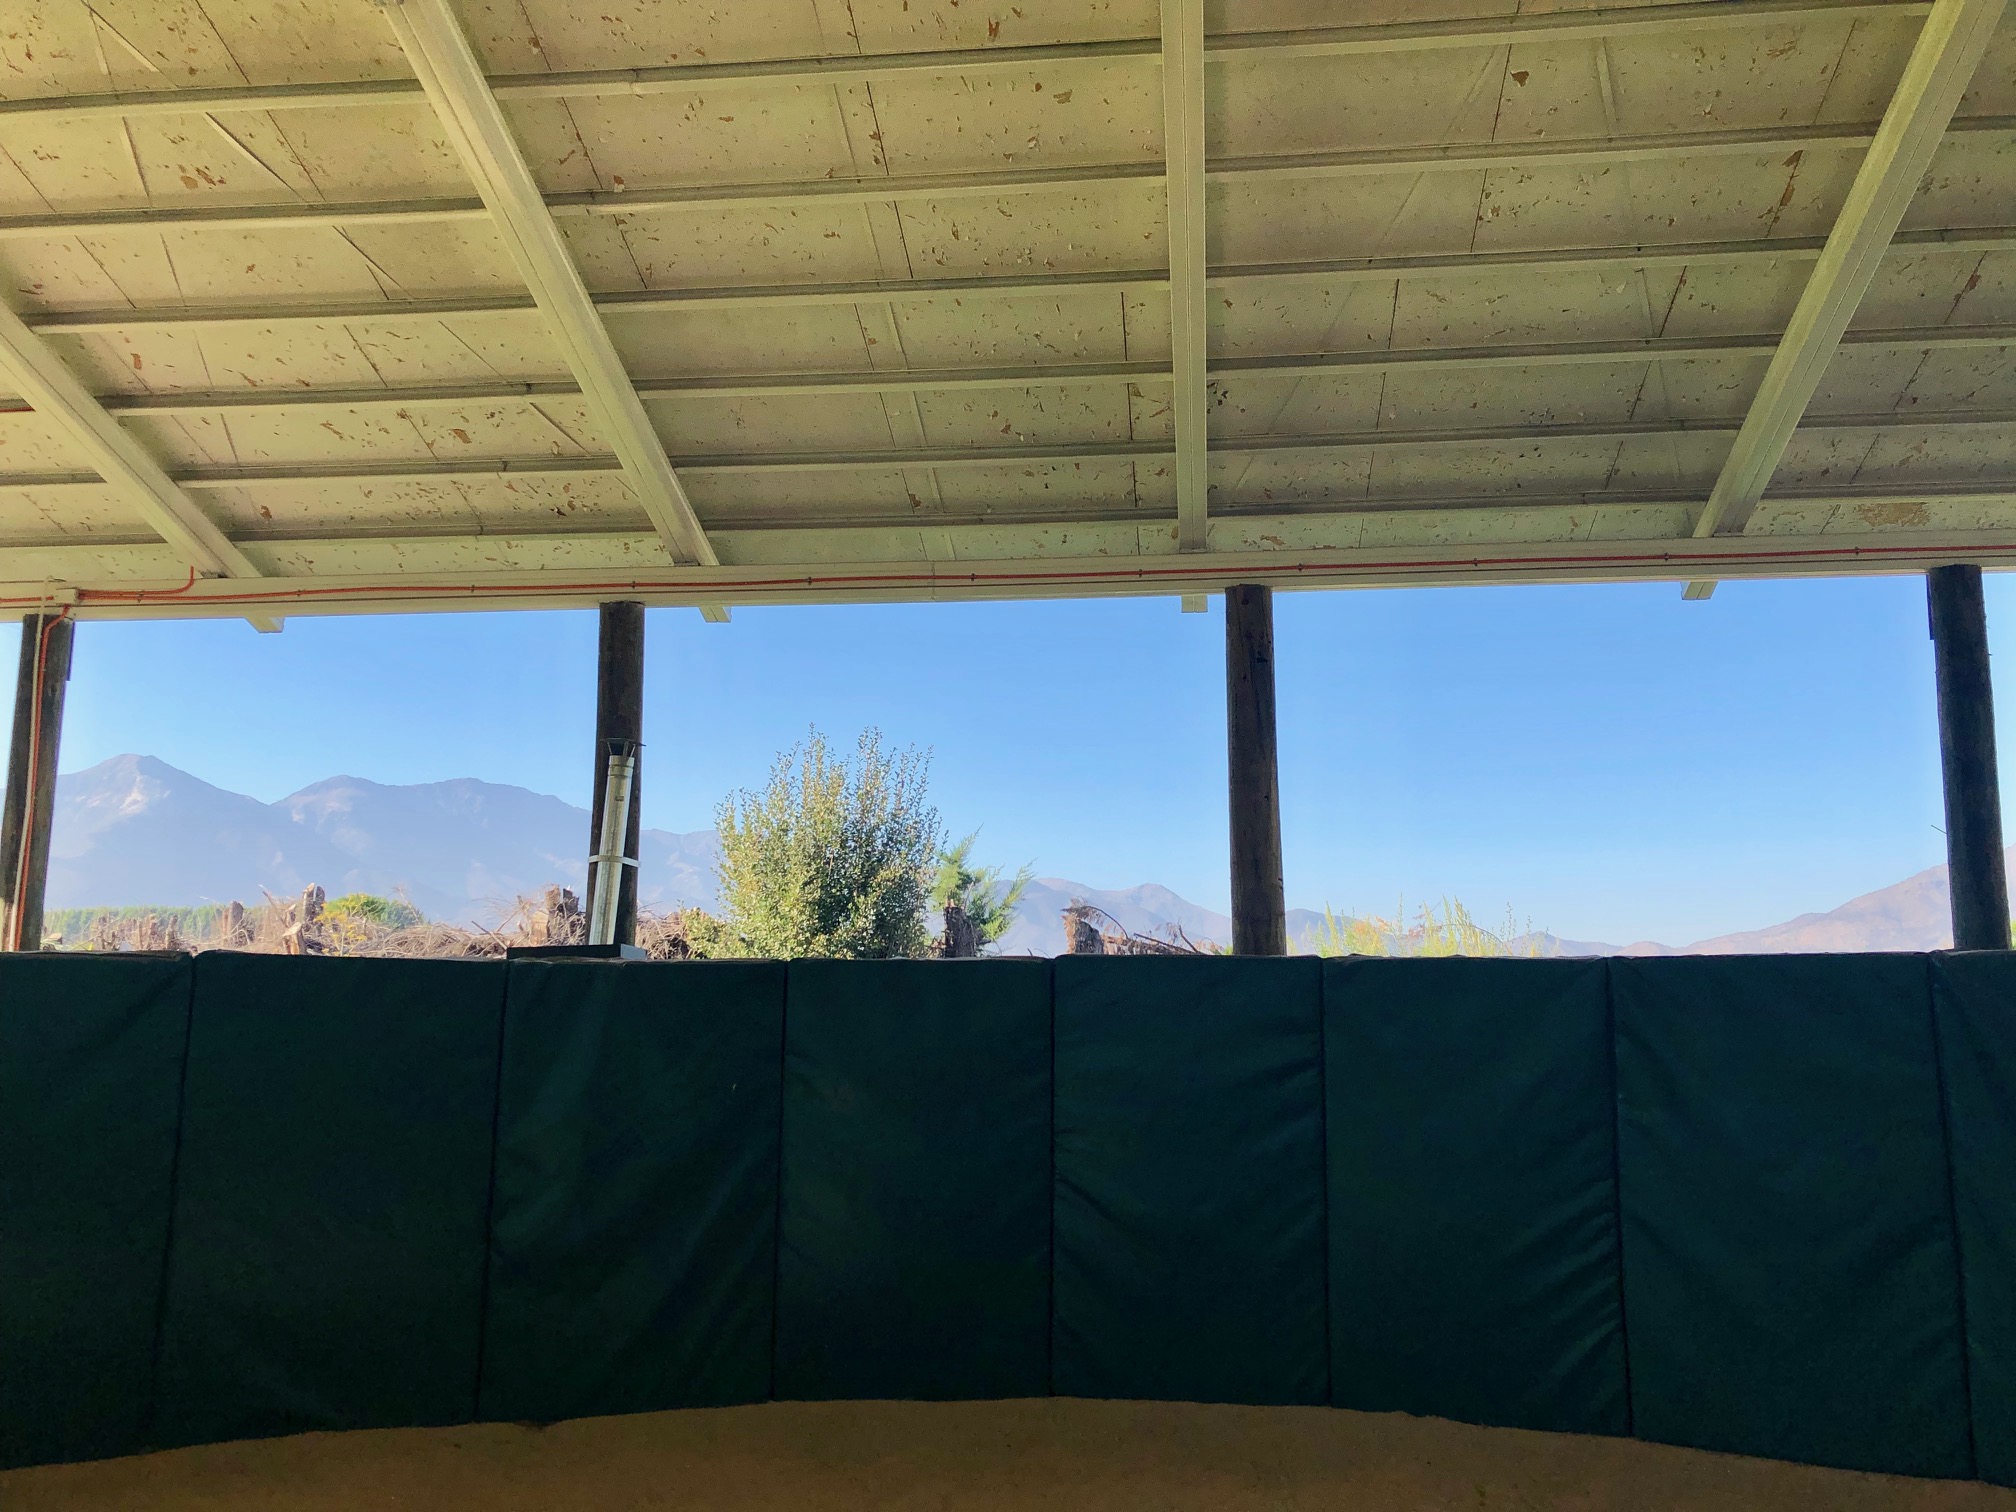 Room with a view: California Chrome’s breeding shed is overlooked by the Andes. Photo: Amanda Duckworth